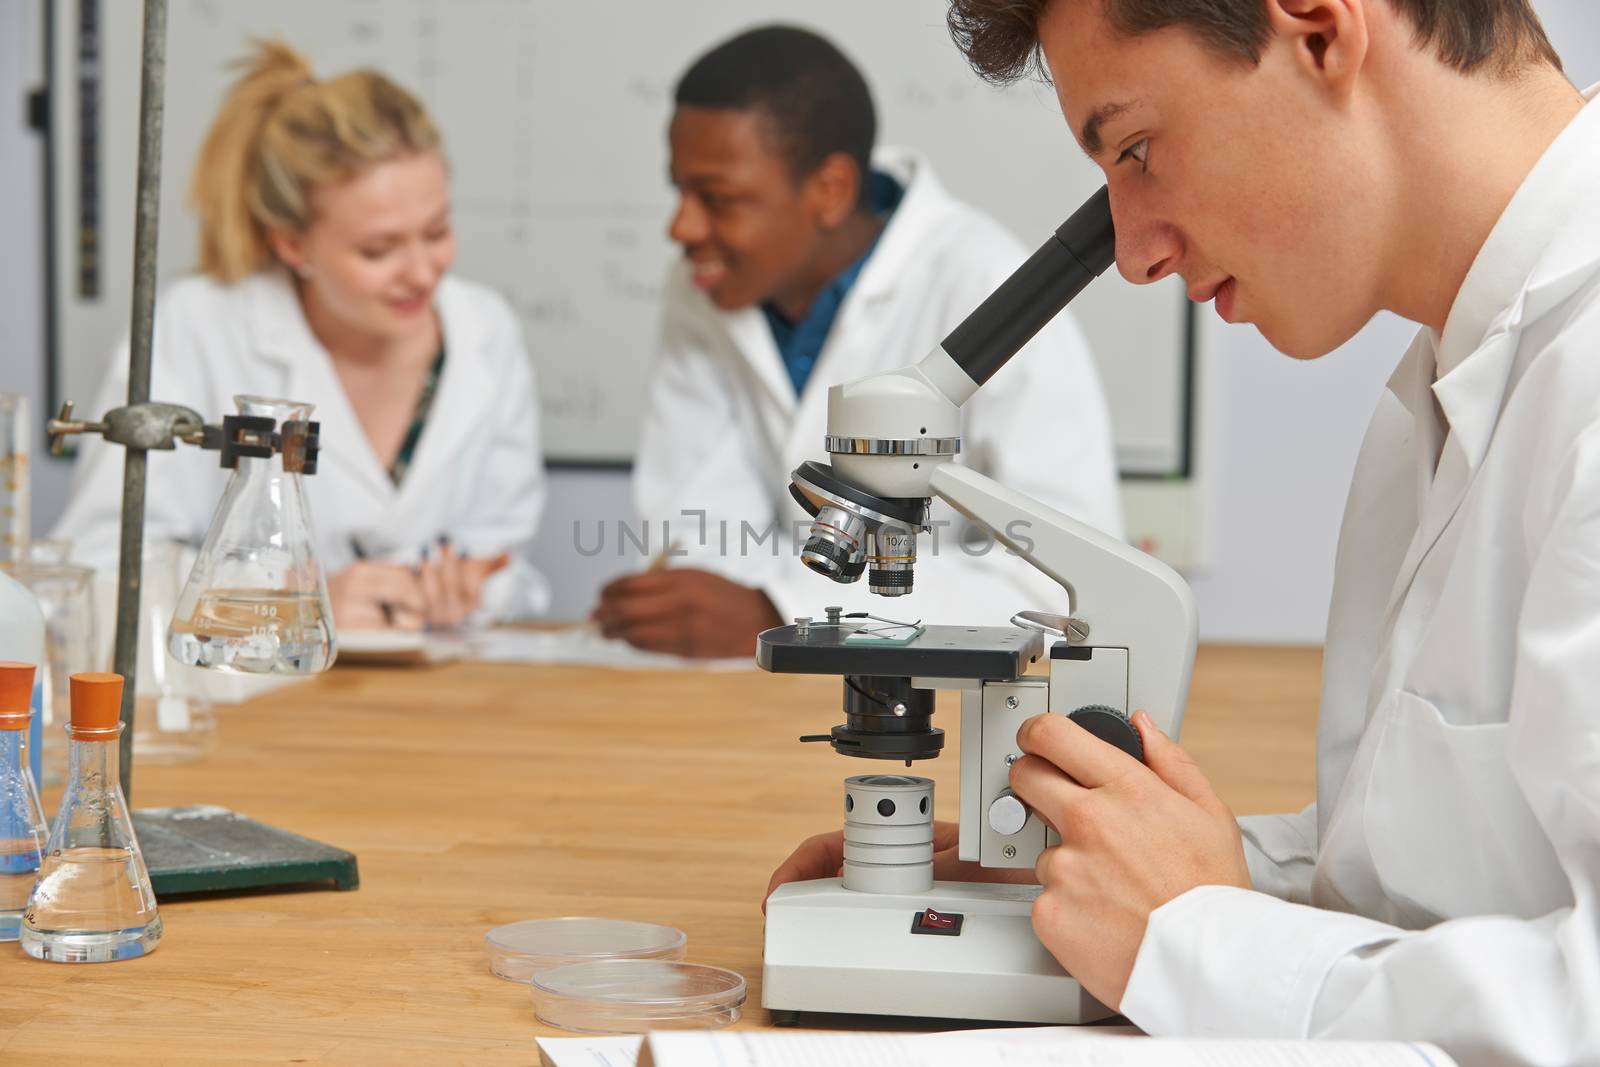 Teenage Students In Science Class Using Microscope by HWS